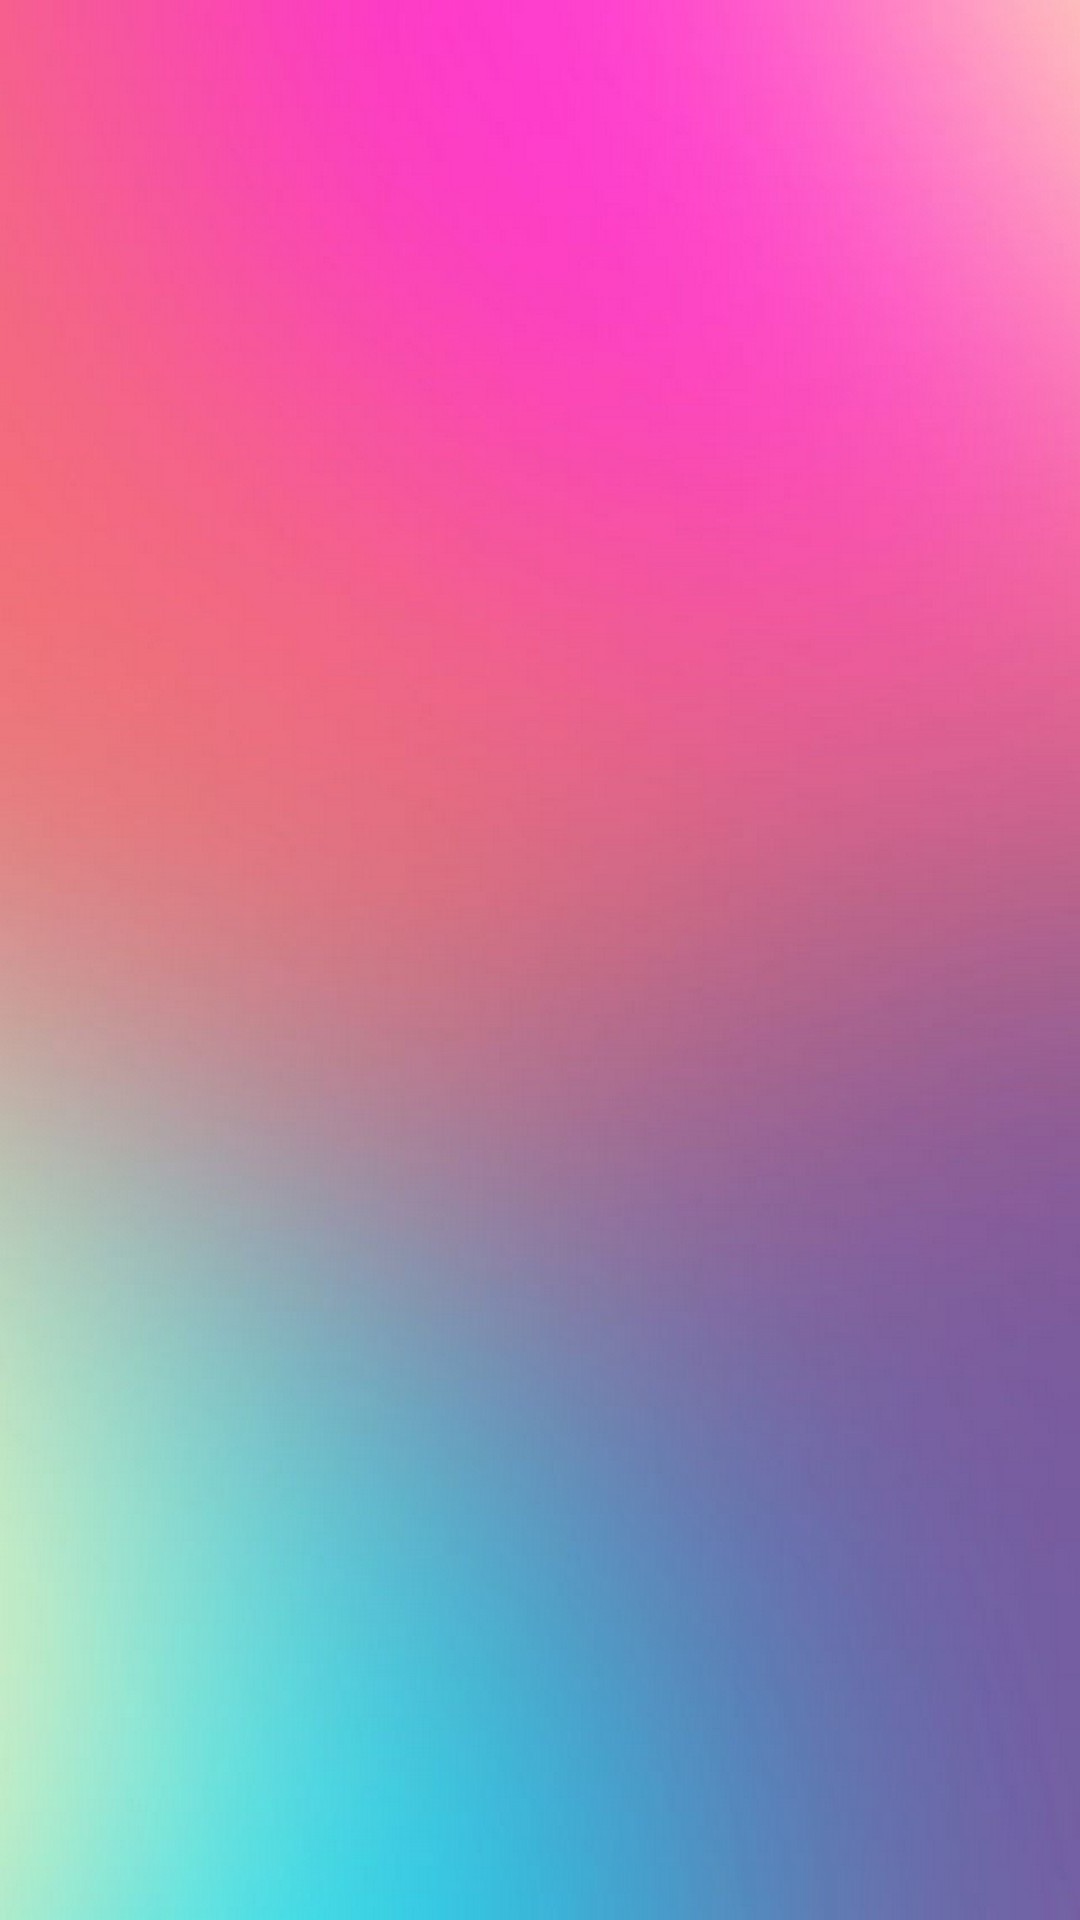 Gradient Backgrounds For Android   2021 Android Wallpapers